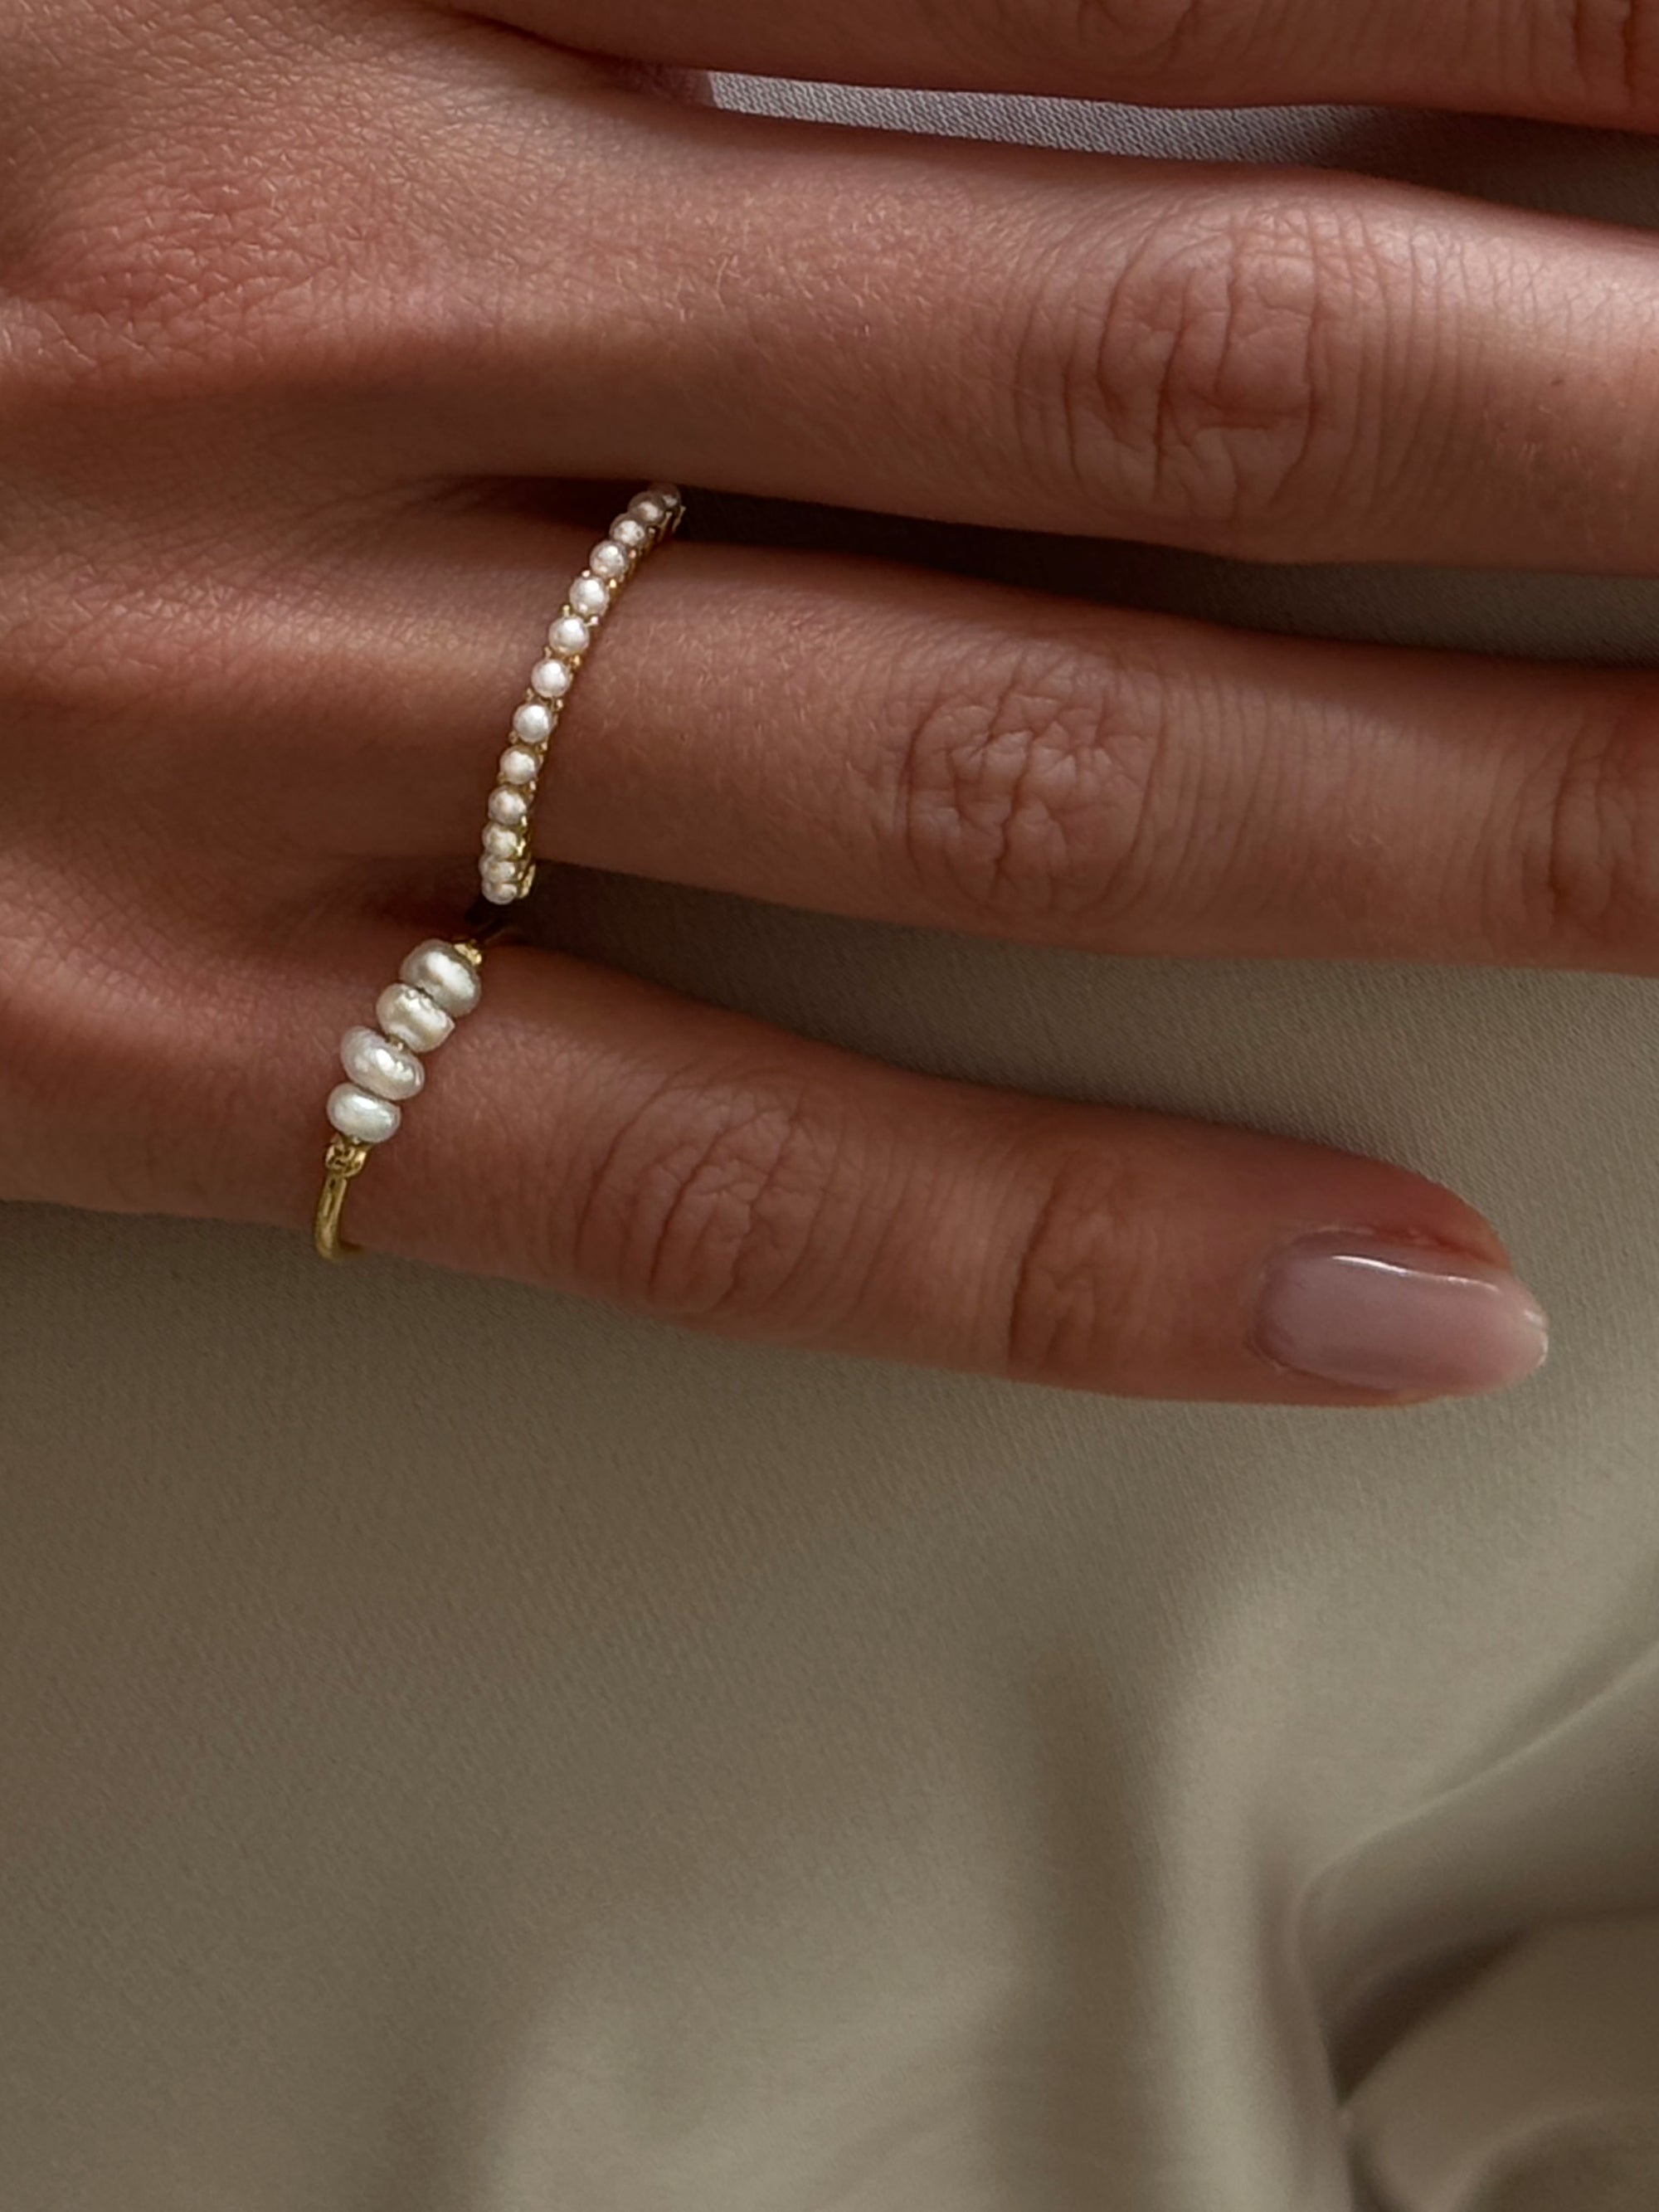 pearl ring 18k gold plated brass